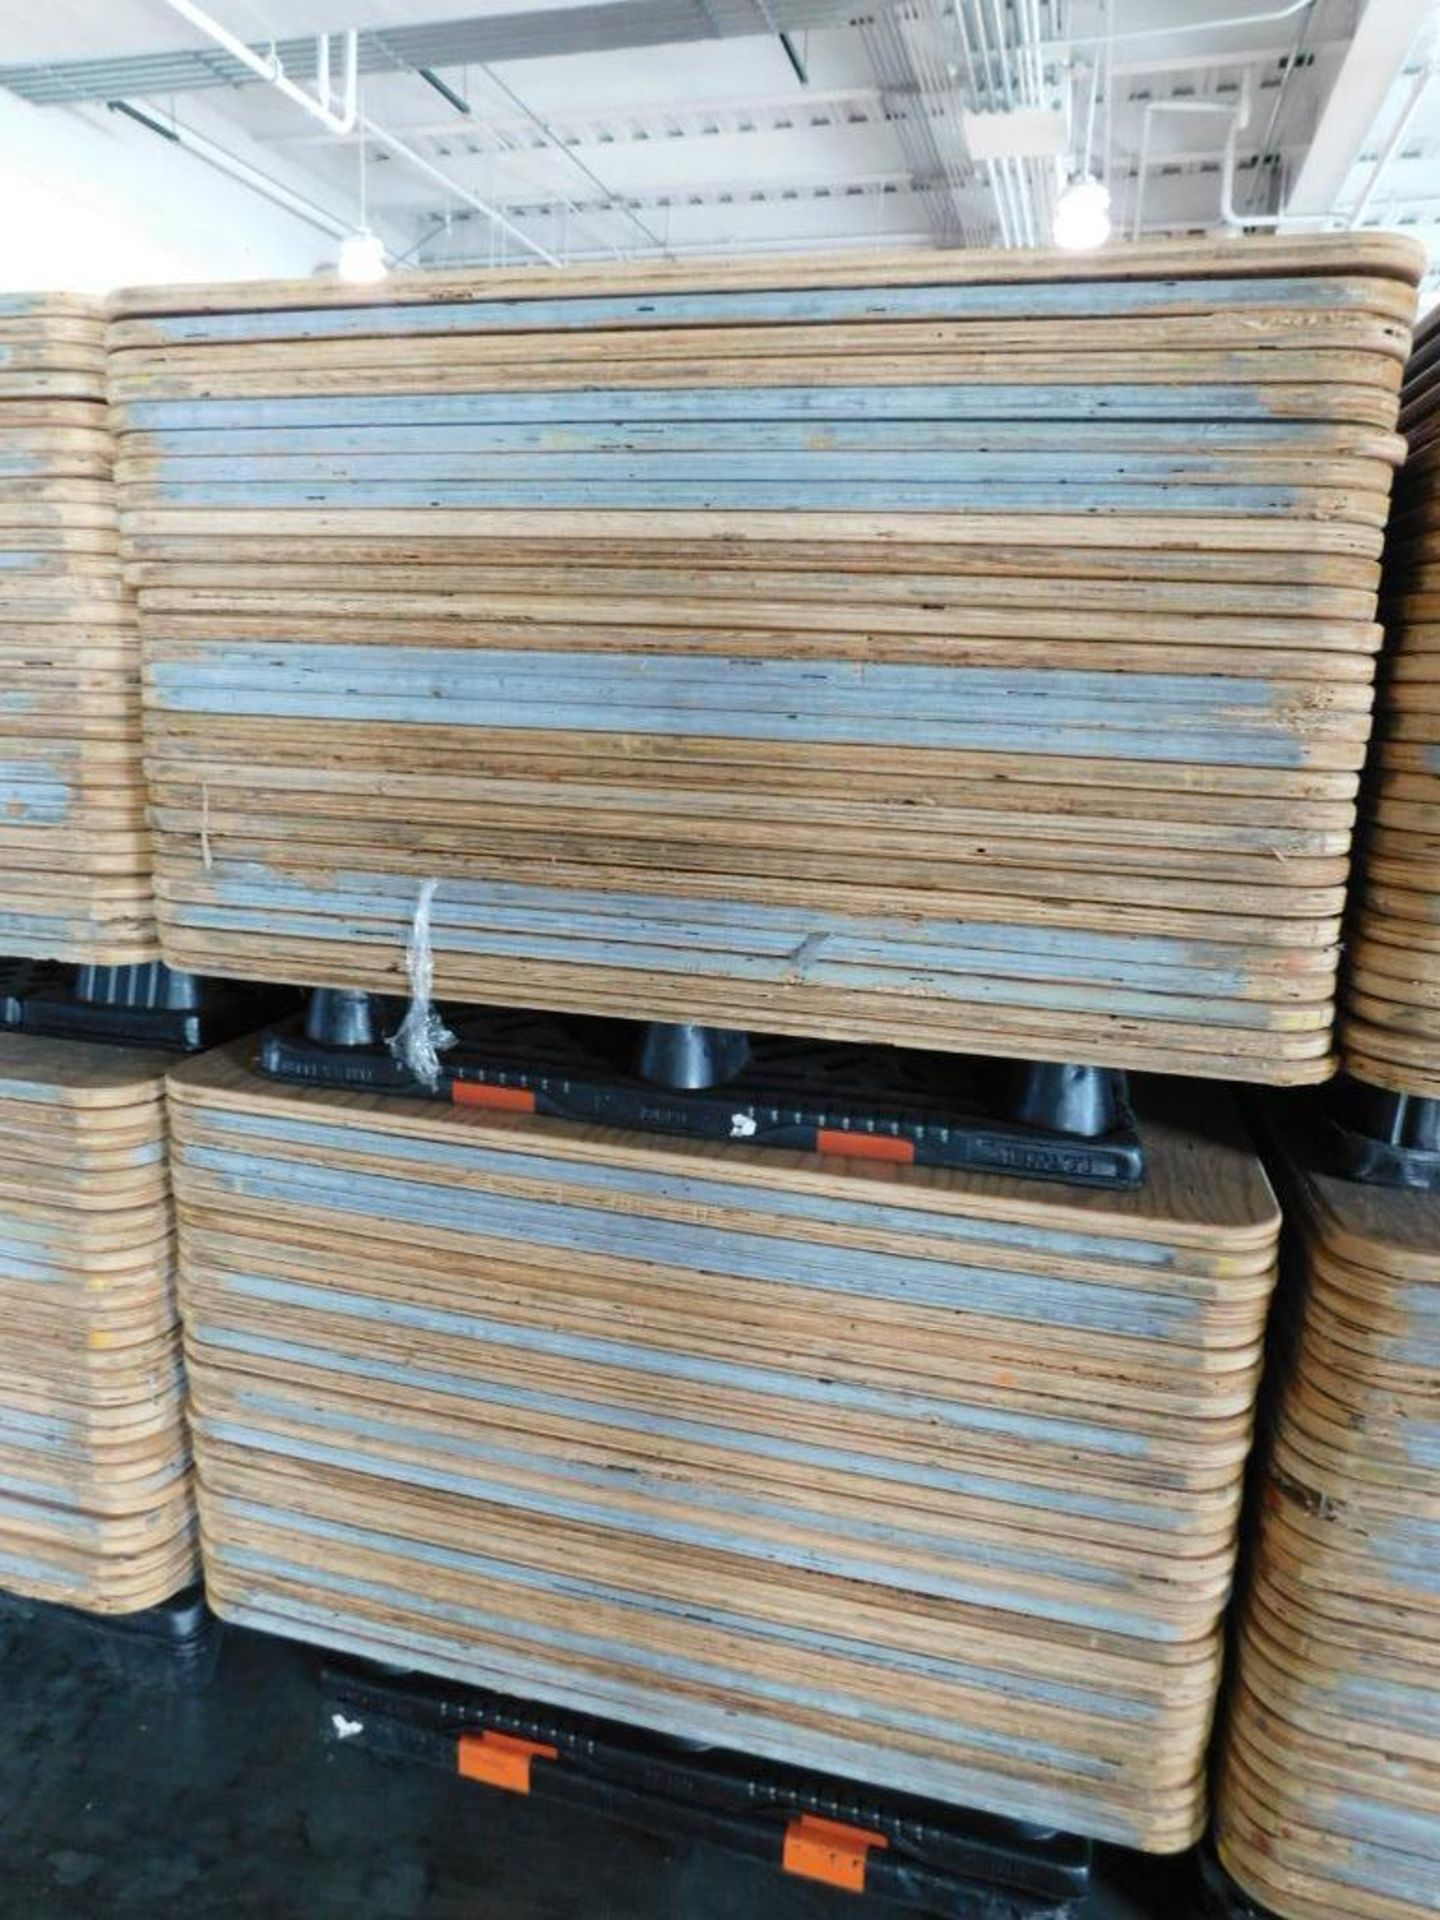 LOT: Large Quantity of 50" x 50" Wood Paper Roll Pallets on (12) Plastic Pallets (LOCATION: IN MAIL - Image 4 of 7